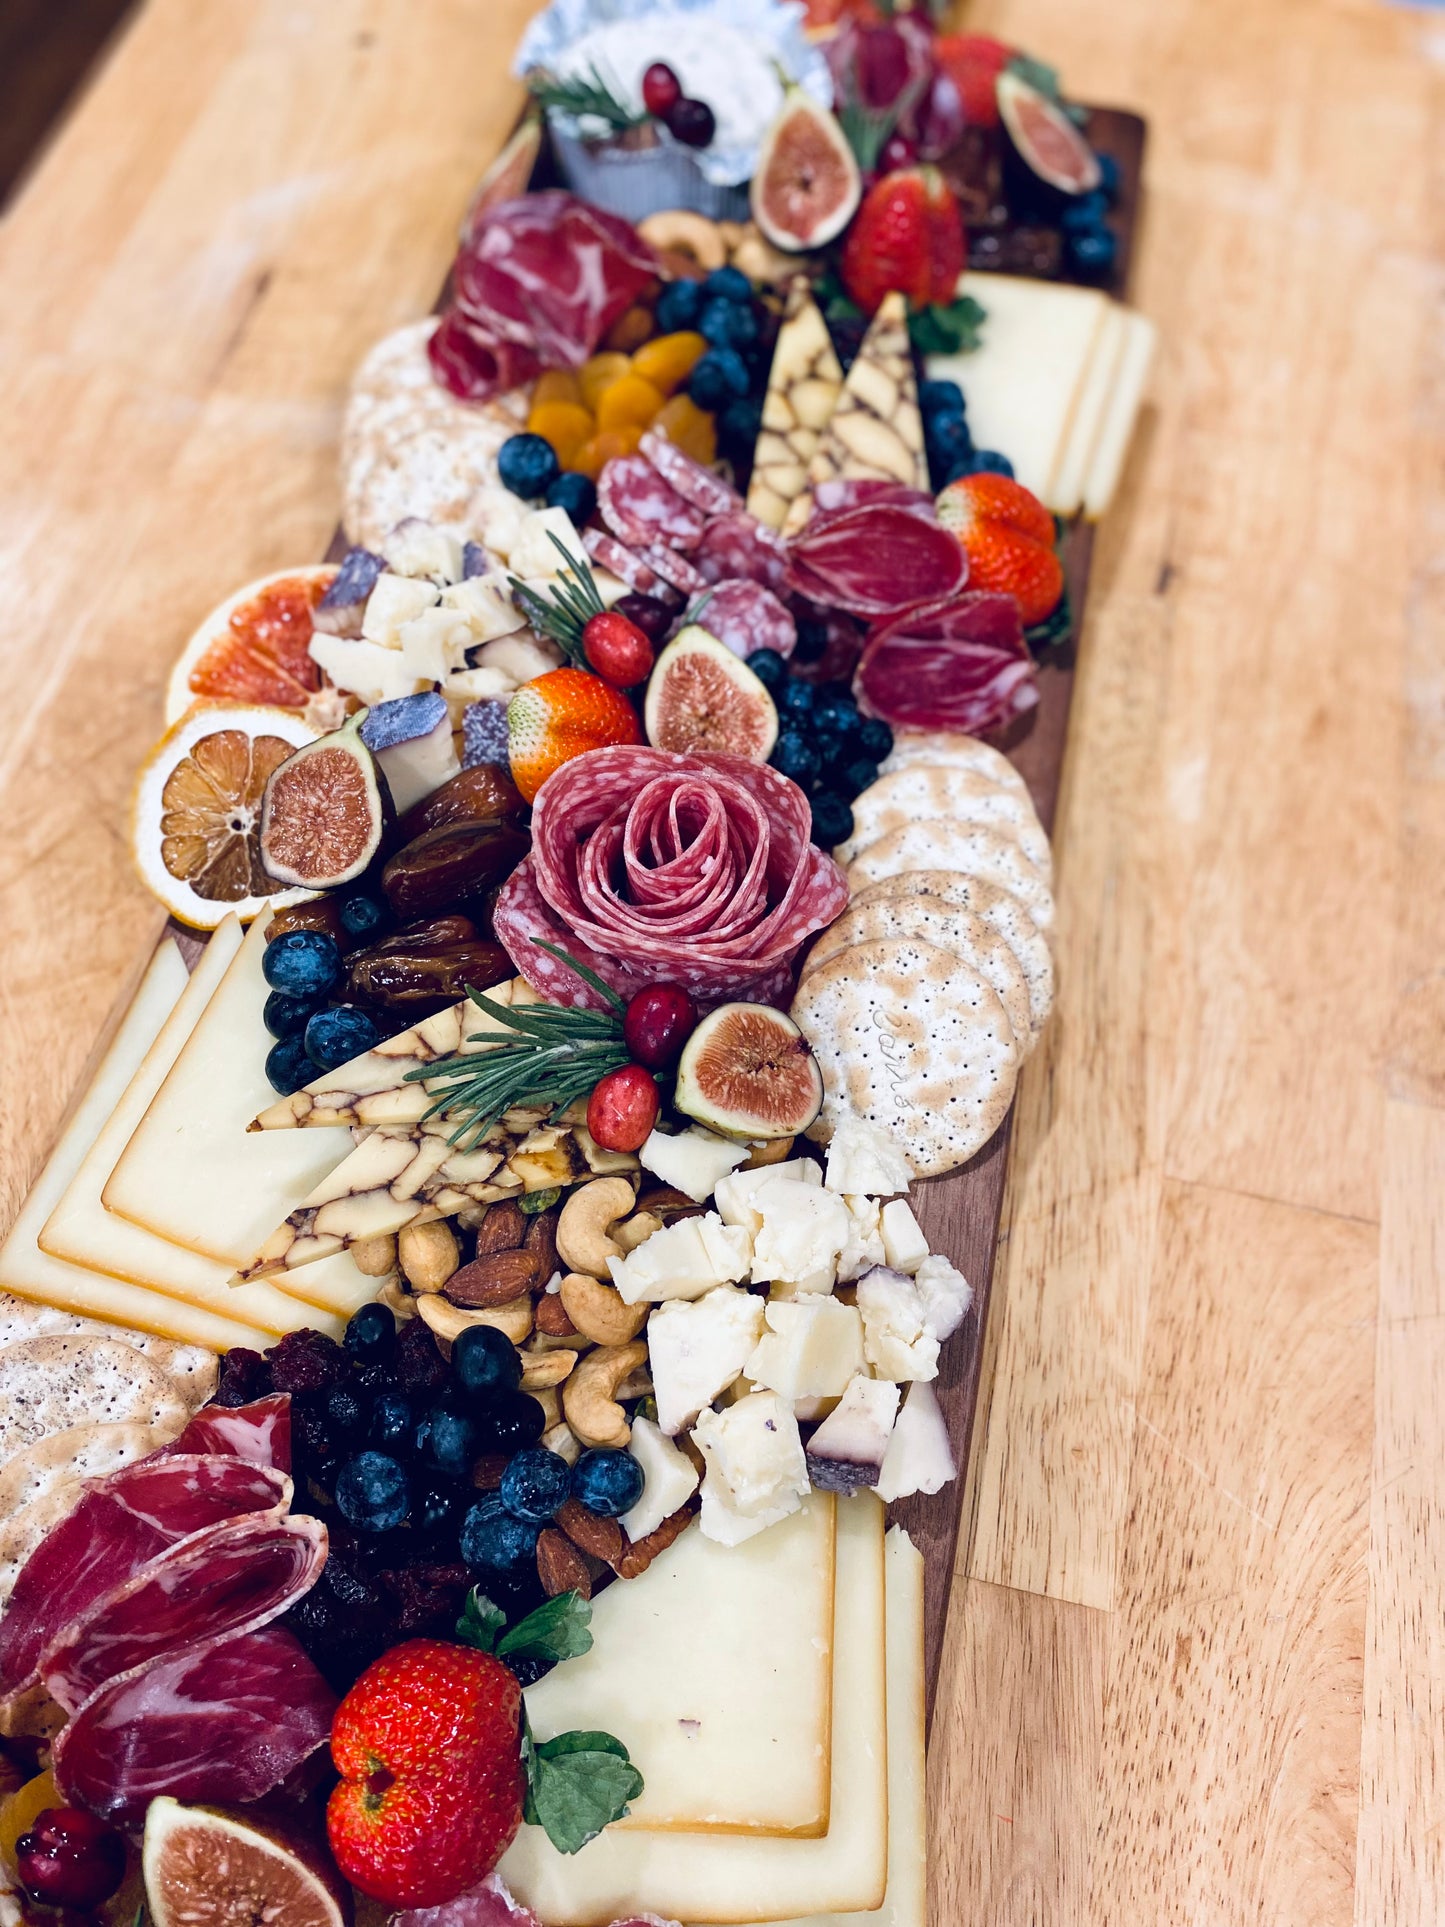 Classic Charcuterie & Cheese board for 10-14 people